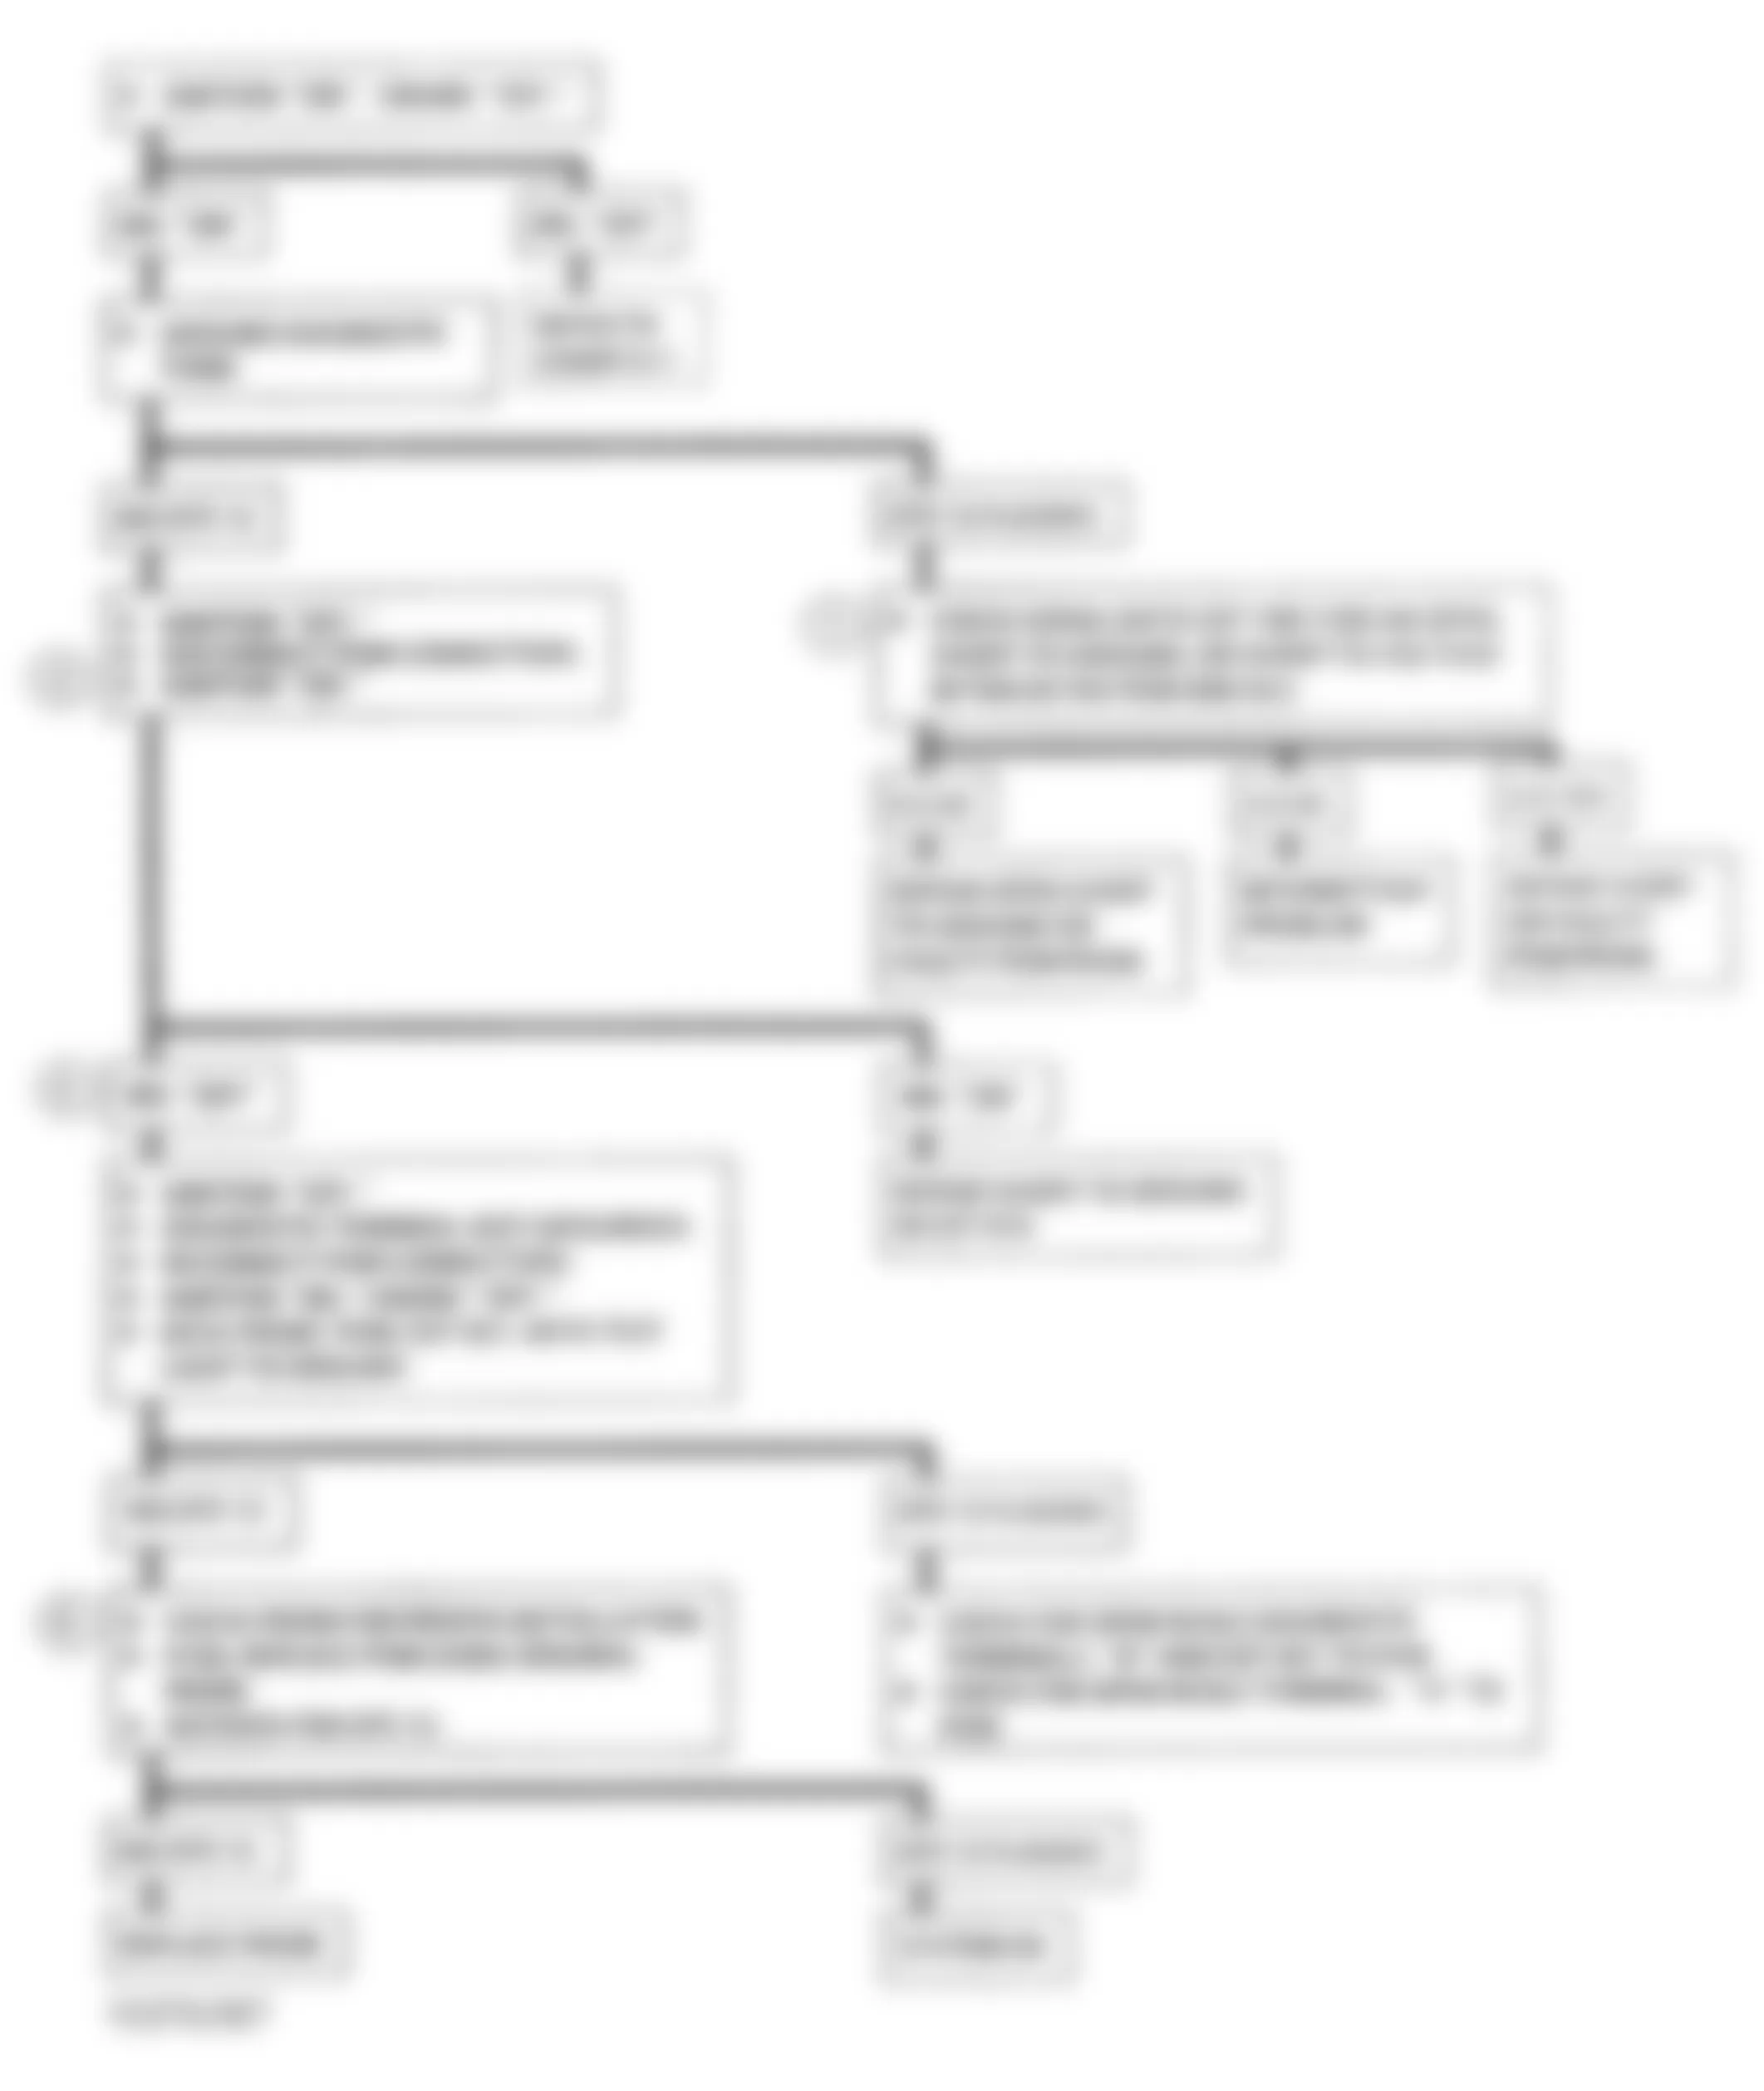 GMC Suburban C1500 1993 - Component Locations -  A-2, Flowchart, No DLC Data, MIL On All Time - A/T